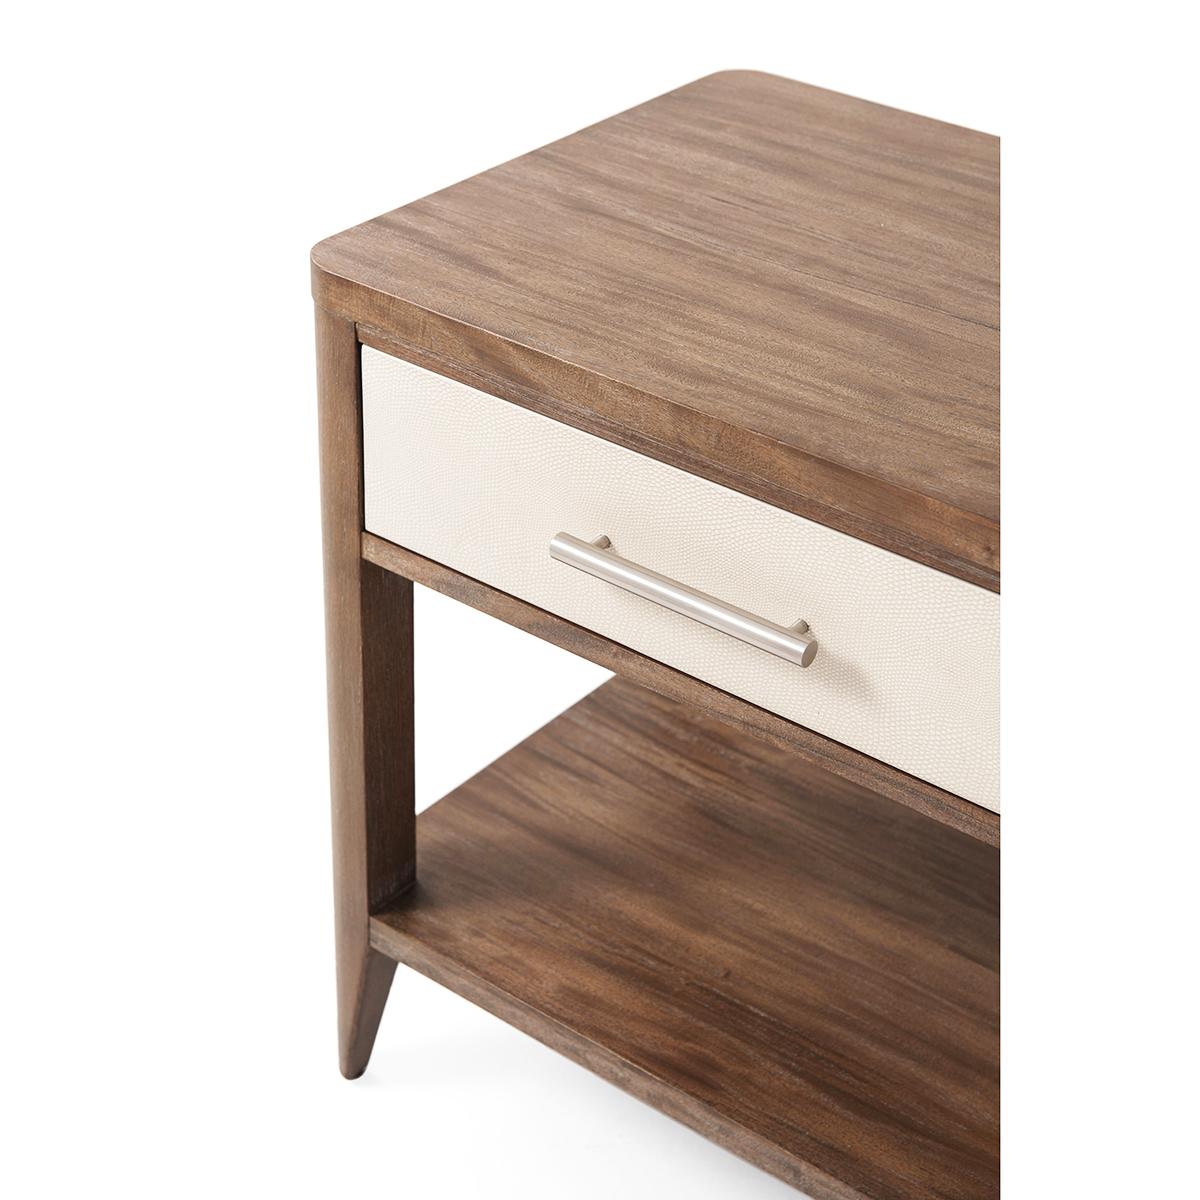 Contemporary Light Mid Century Bedside Table - 23